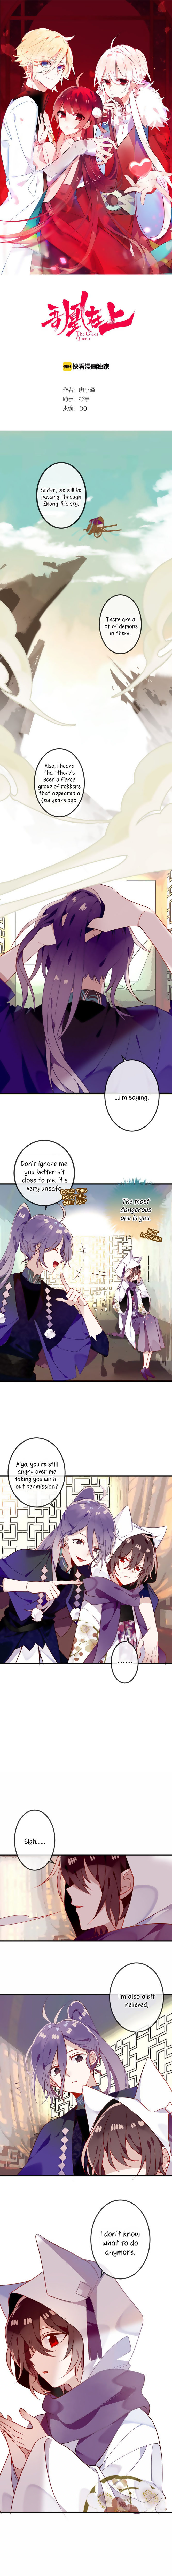 My Phoenix's On Top Ch. 54 Purple hair prince attracts fancy!